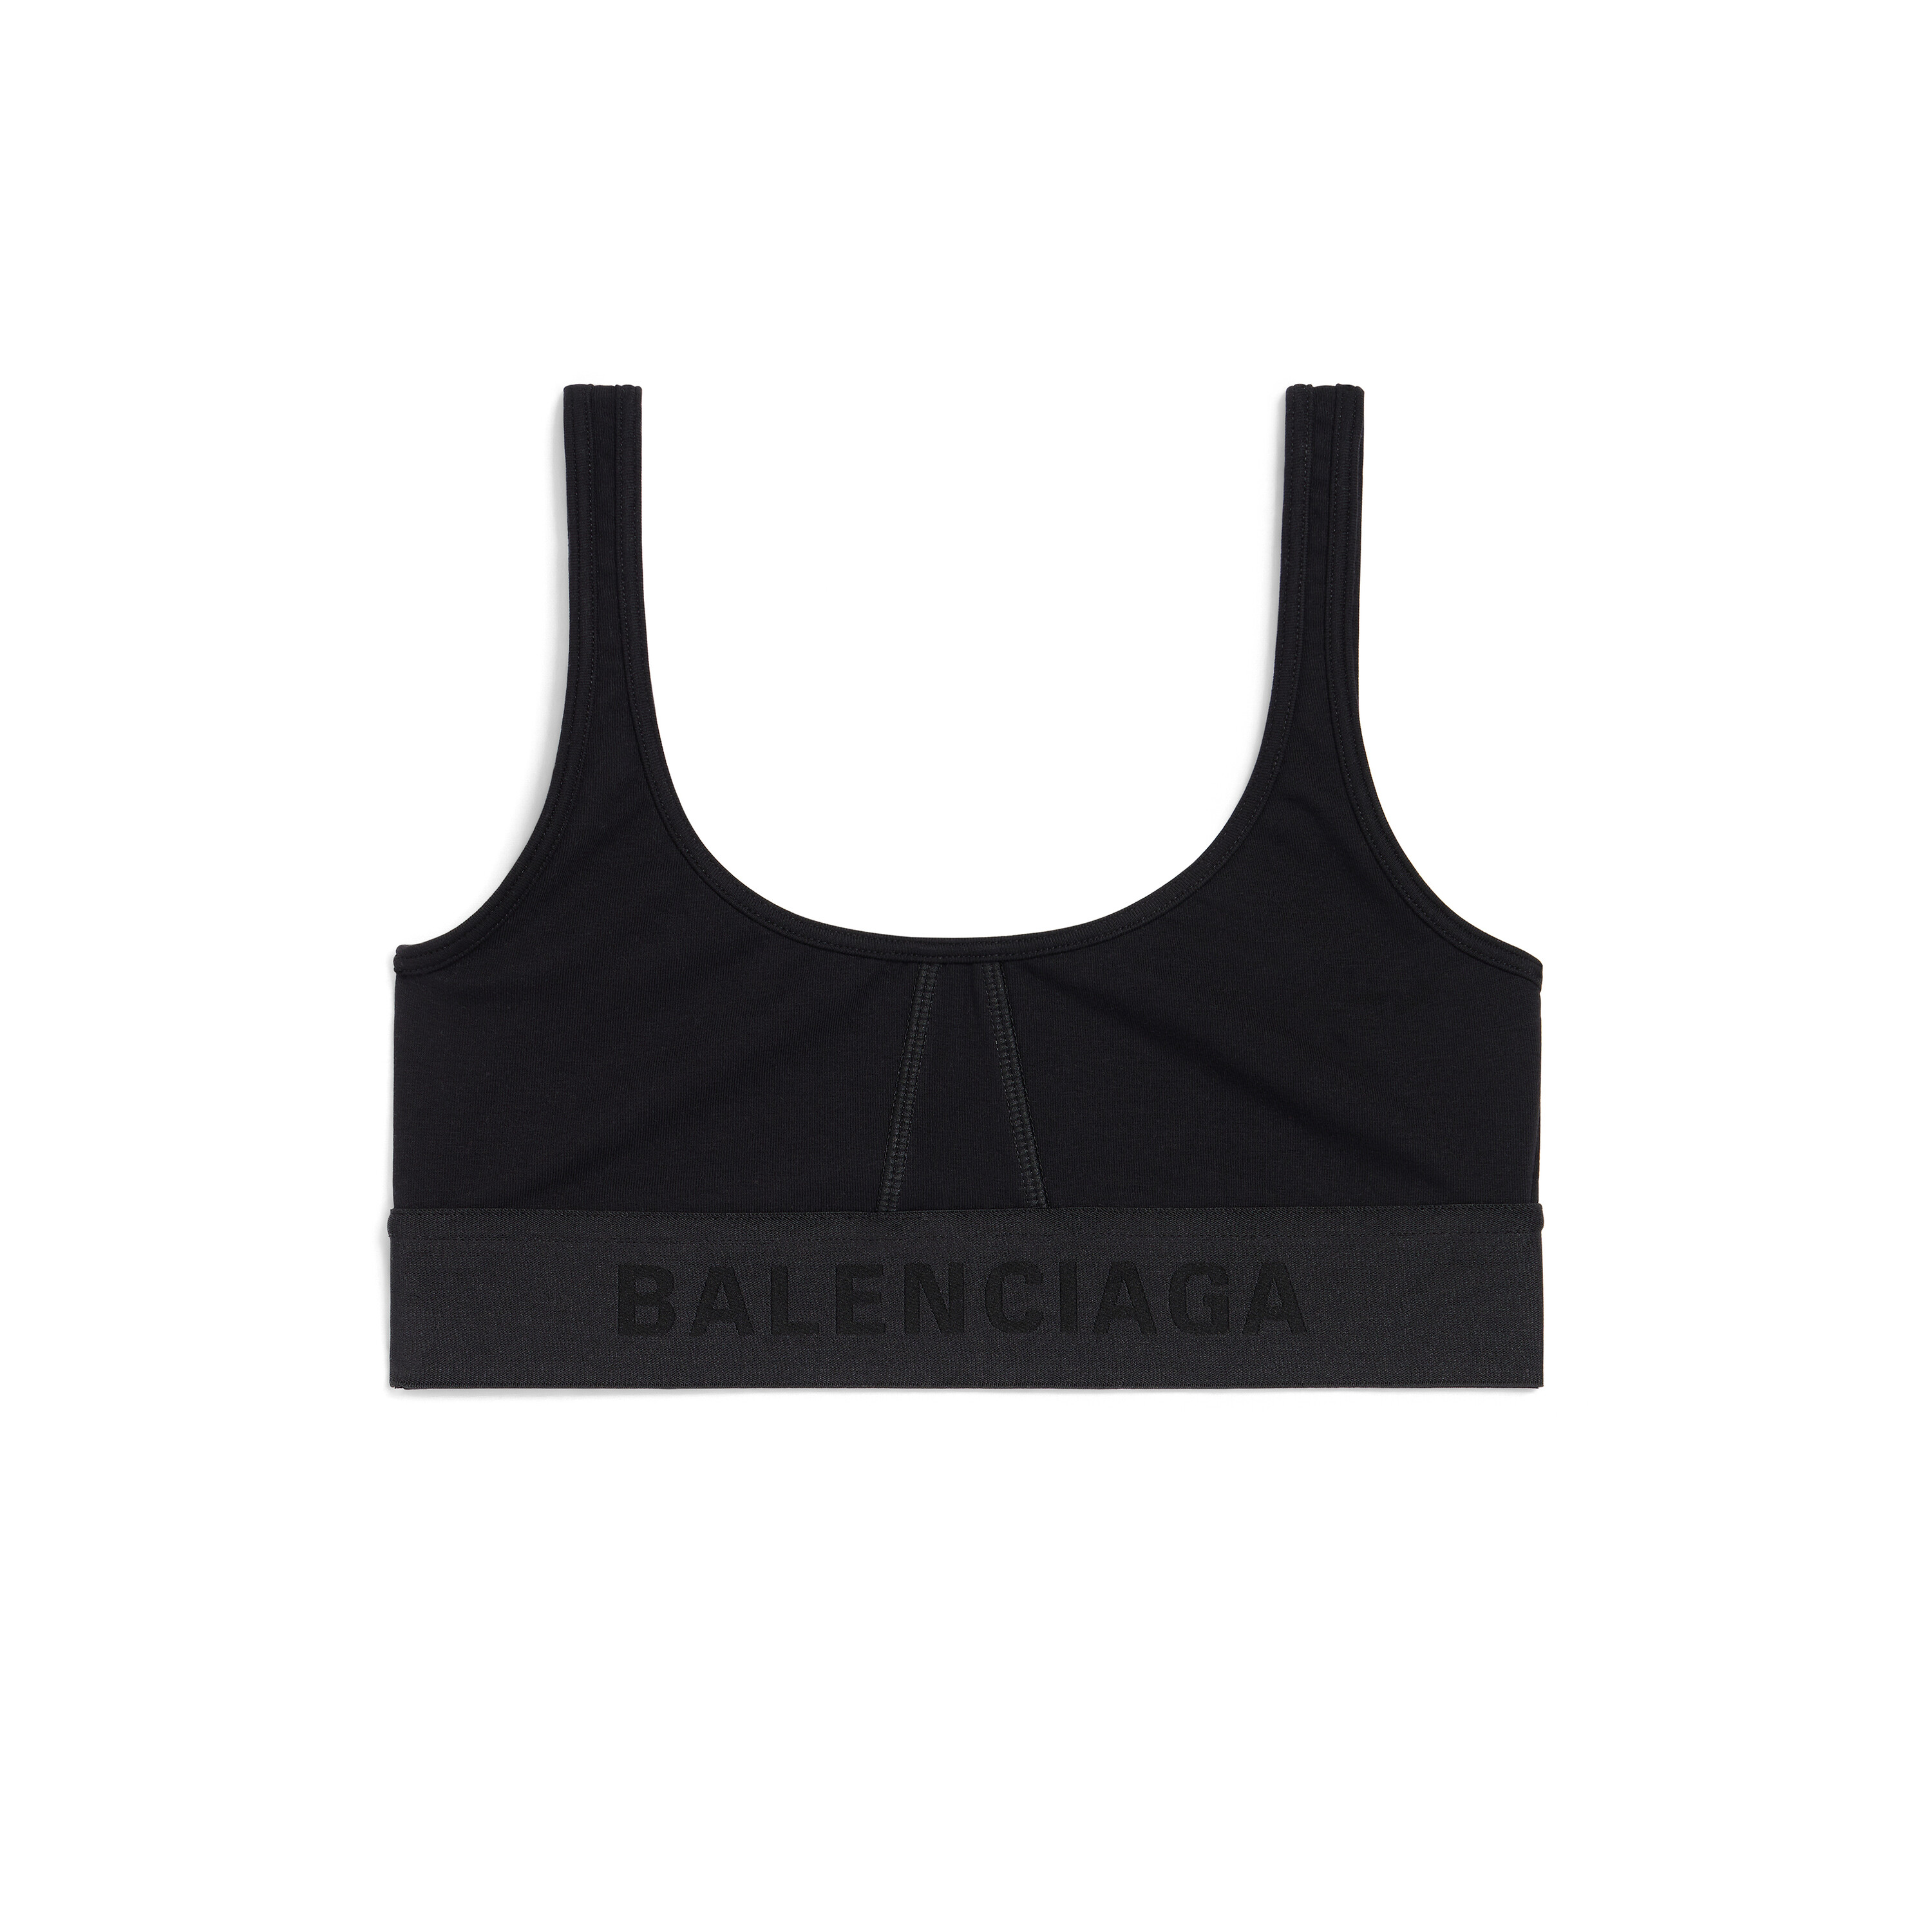 Prisma Sporty Black Moulded Sports Bra - Perfect for Active Women